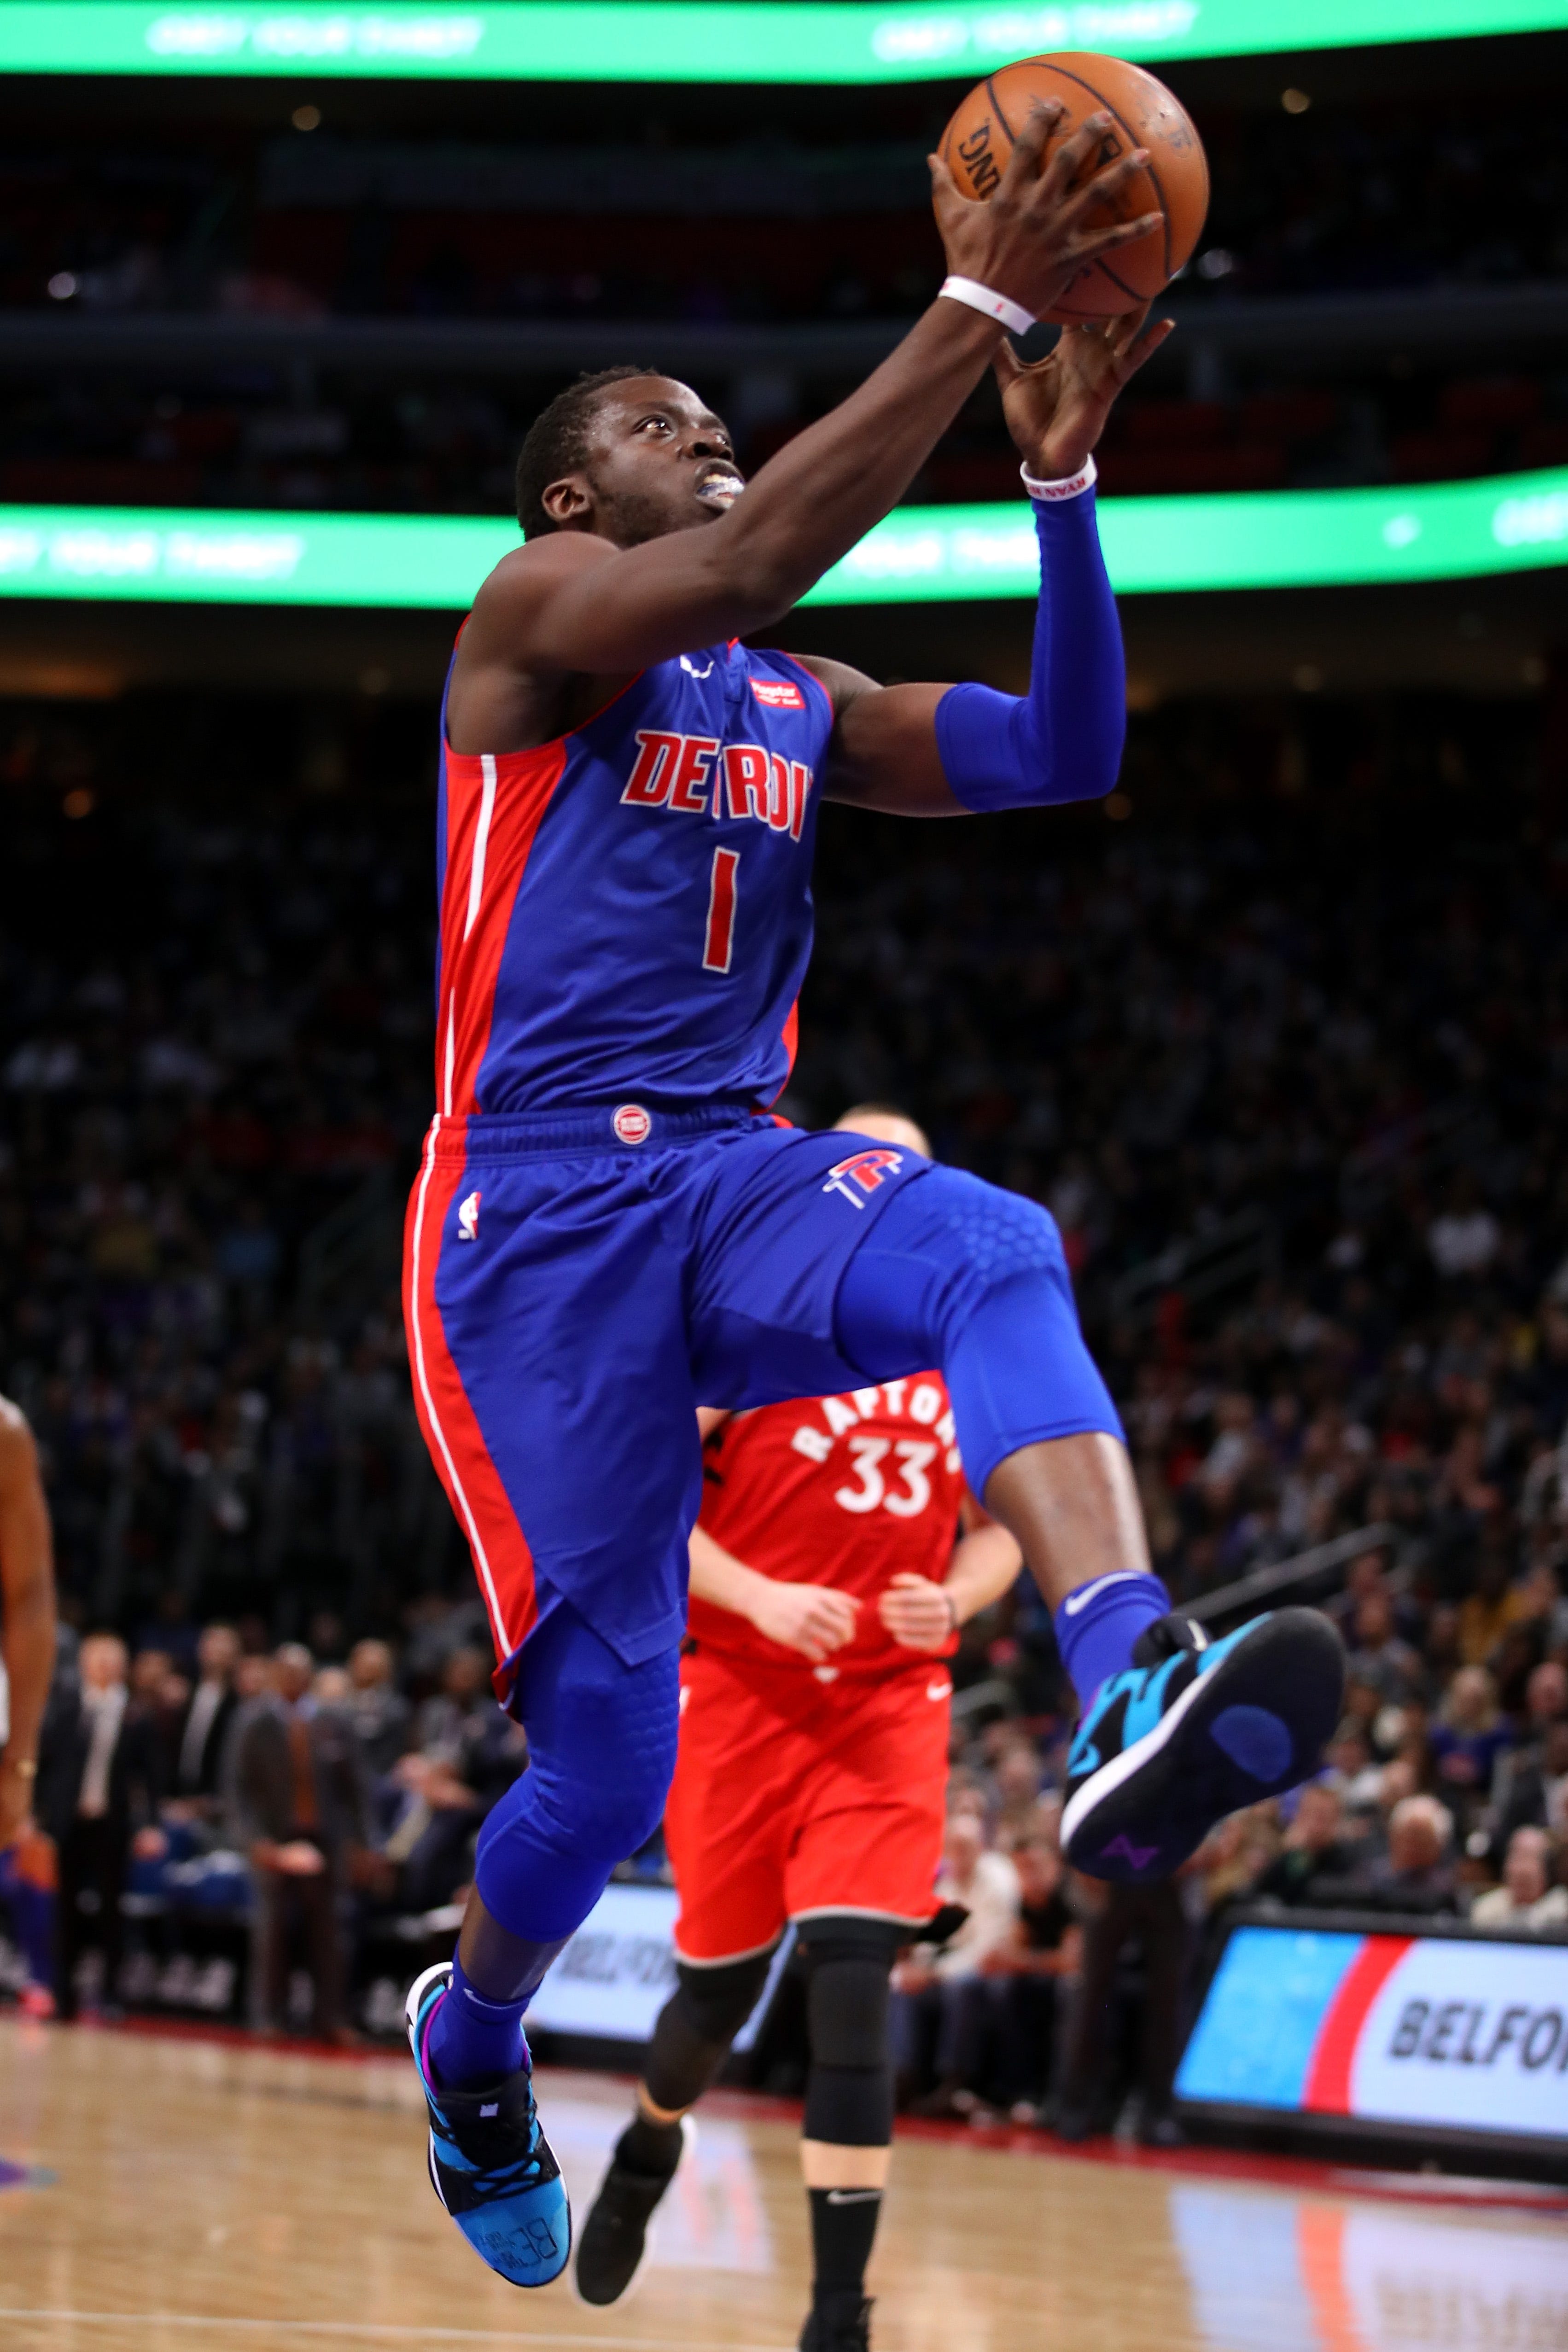 Pistons guard Reggie Jackson has posted double figures in scoring in 16 straight games.